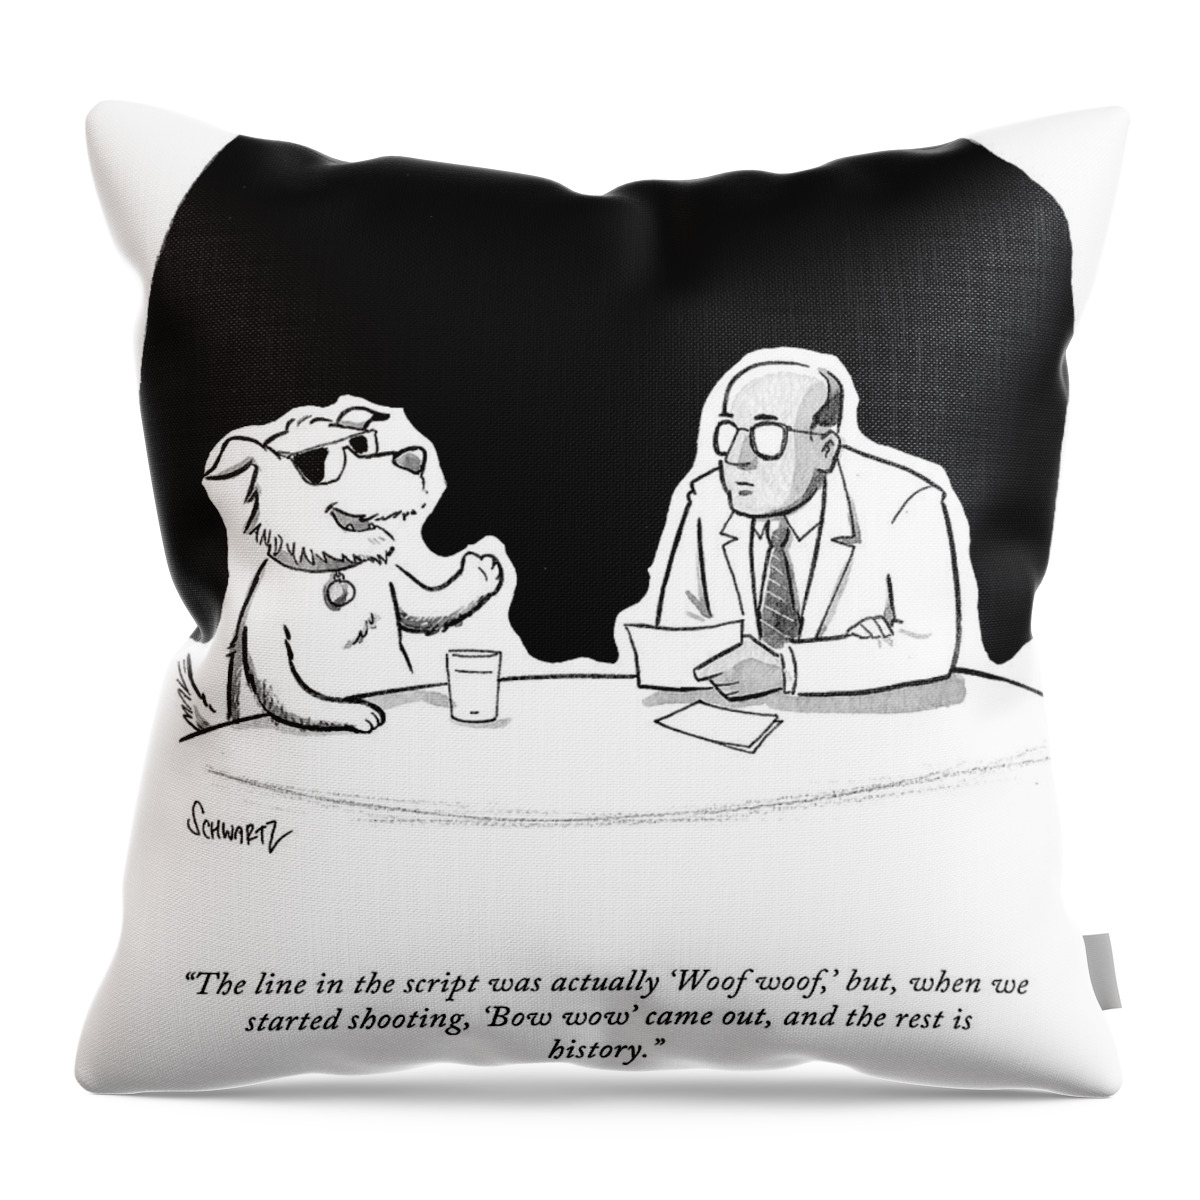 The Rest Is History Throw Pillow